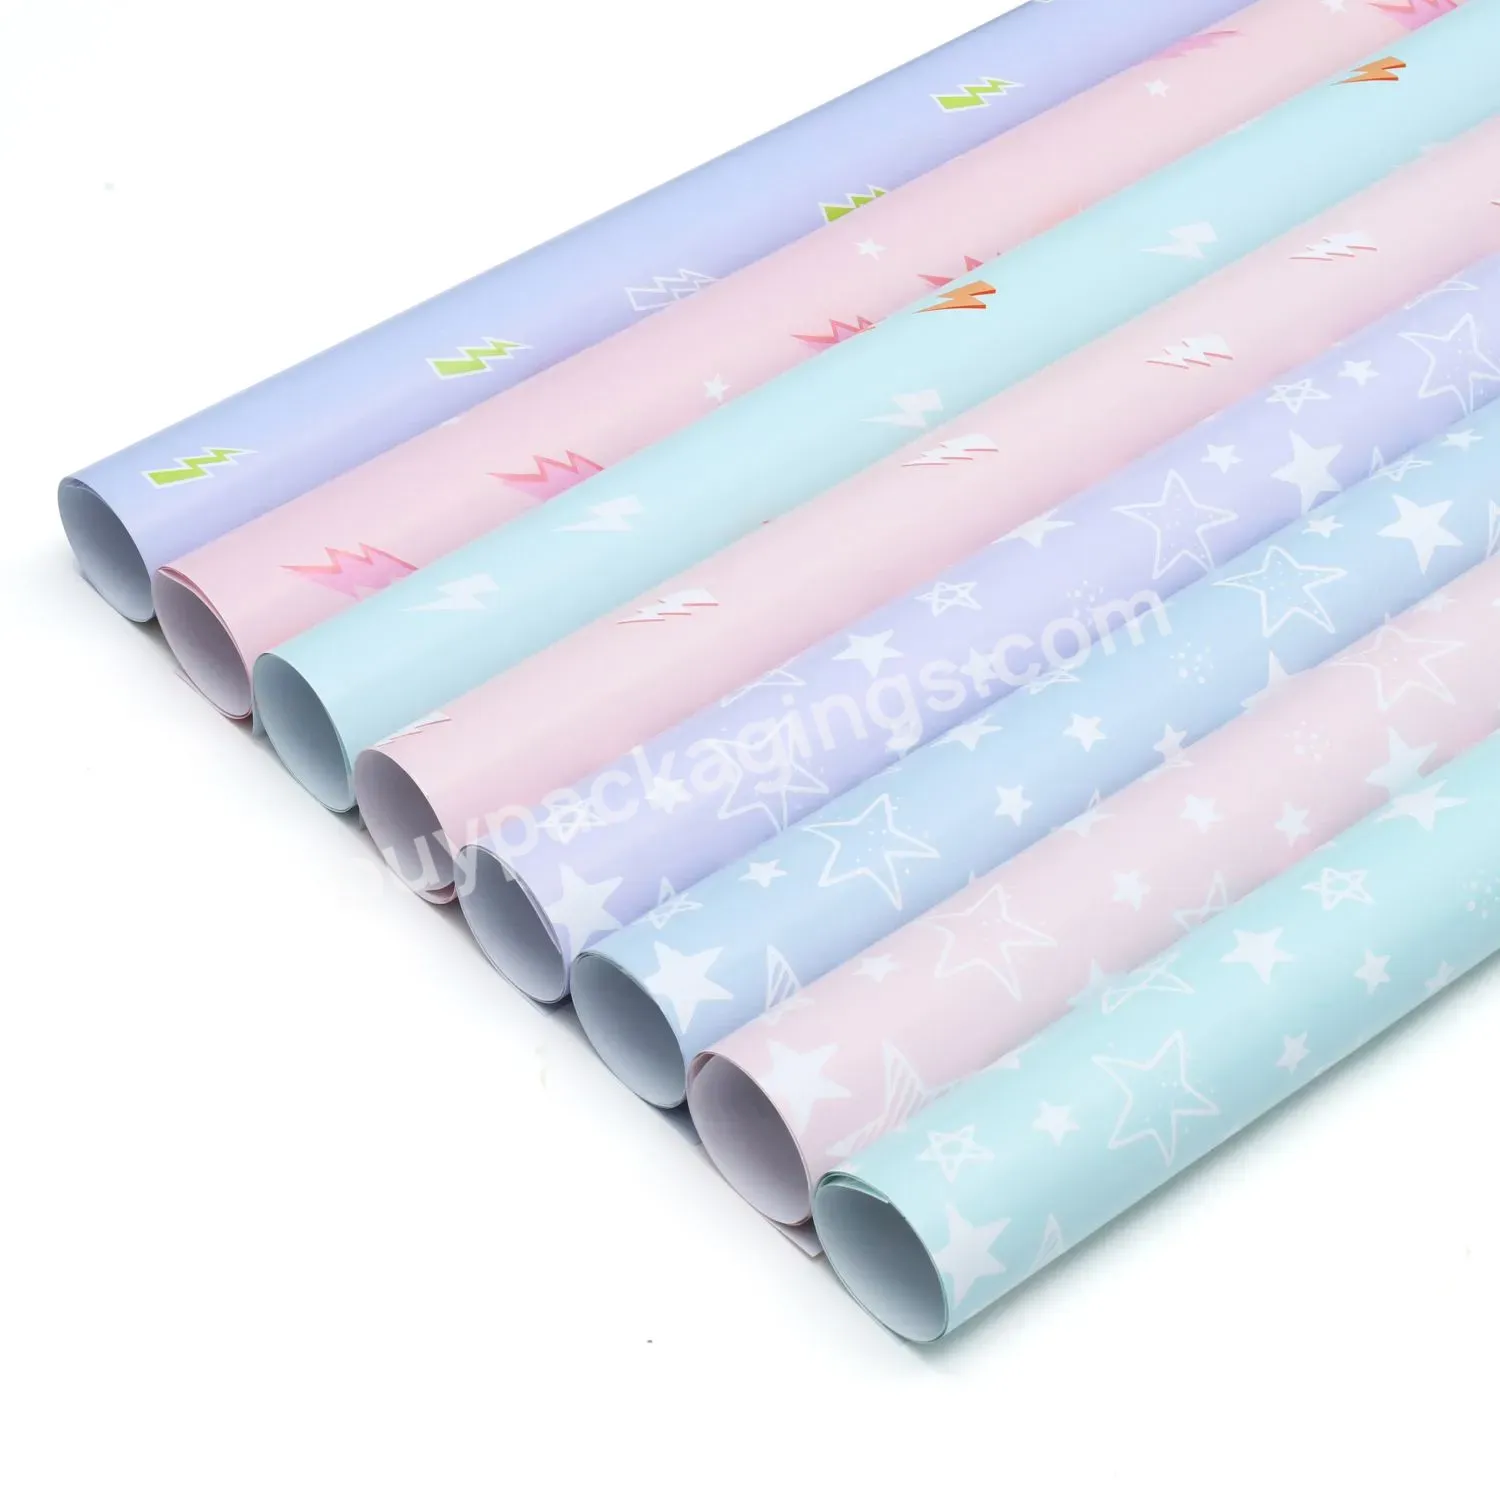 Presents Wrap Paper 80gsm Bond Wrapping Paper For Kids Birthday - Buy Presents Wrap Paper,80gsm Bond Wrapping Paper,Kids Birthday.